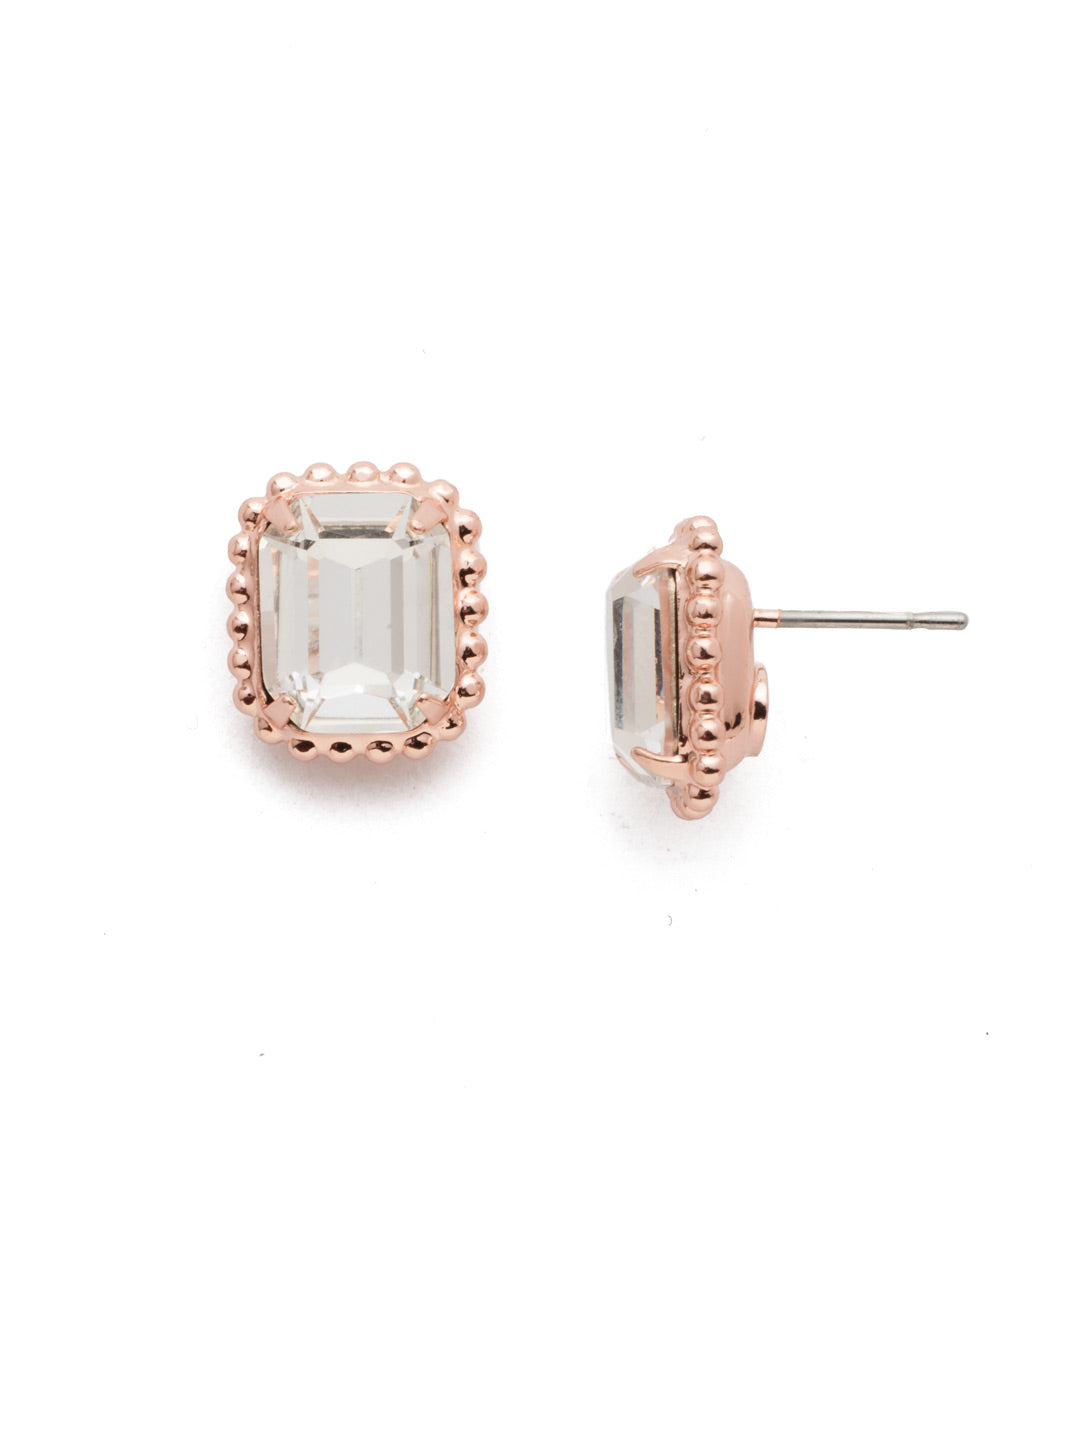 Scalloped Emerald Cut Stud Earrings - EBW18RGCAZ - Savvy and sophisticated, these rectangular crystal solitaire earrings are finished with a vintage inspired decorative edged border, for a simply stunning look. From Sorrelli's Crystal Azure collection in our Rose Gold-tone finish.